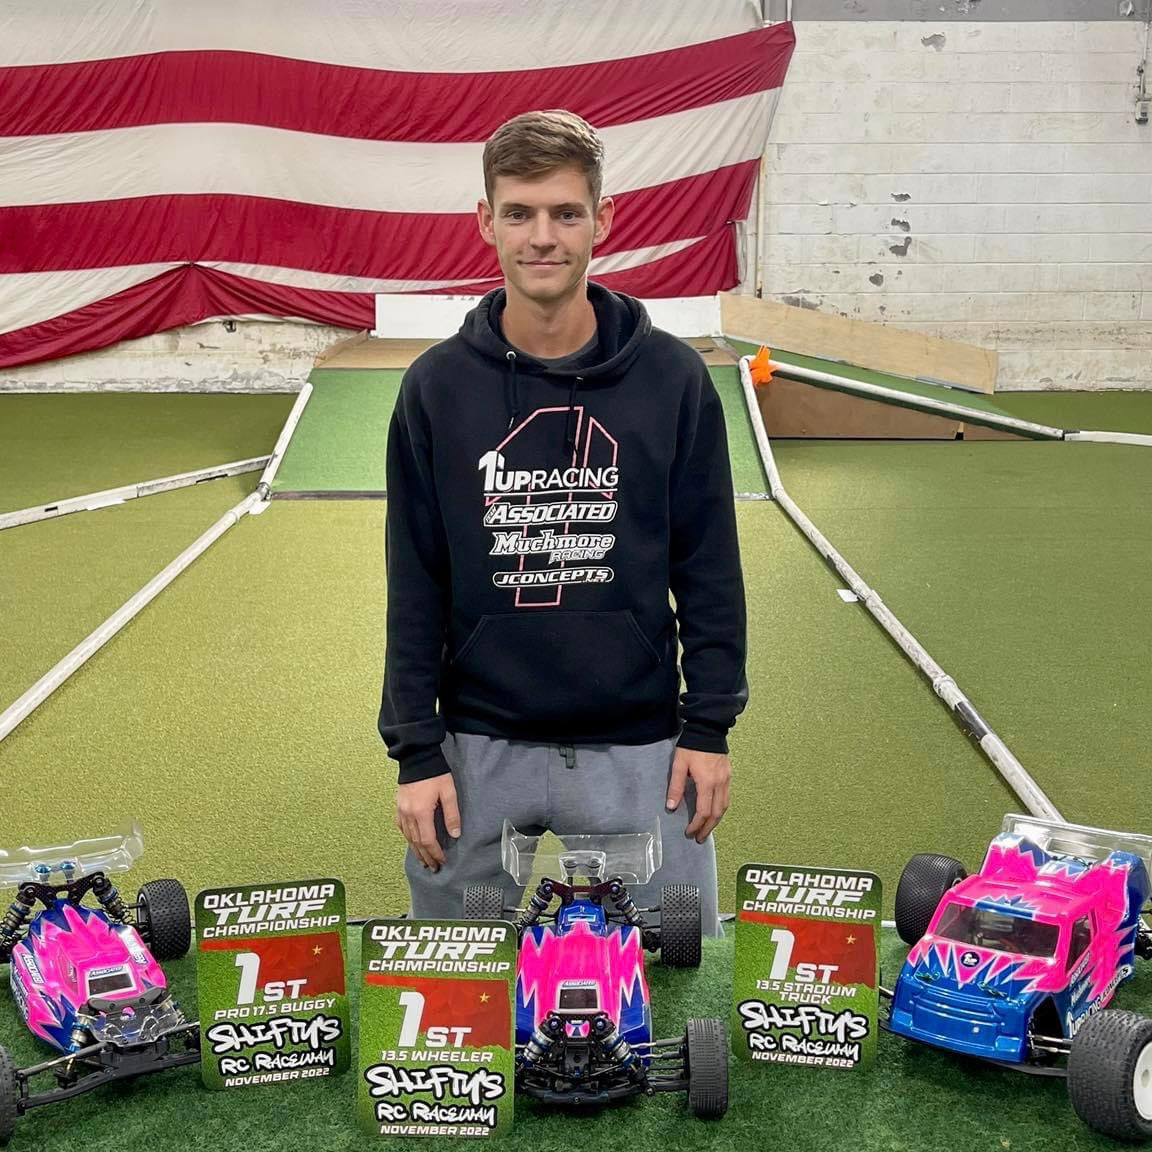 Cameron Eaves pulling the hat trick at Shiftys R/C Raceway